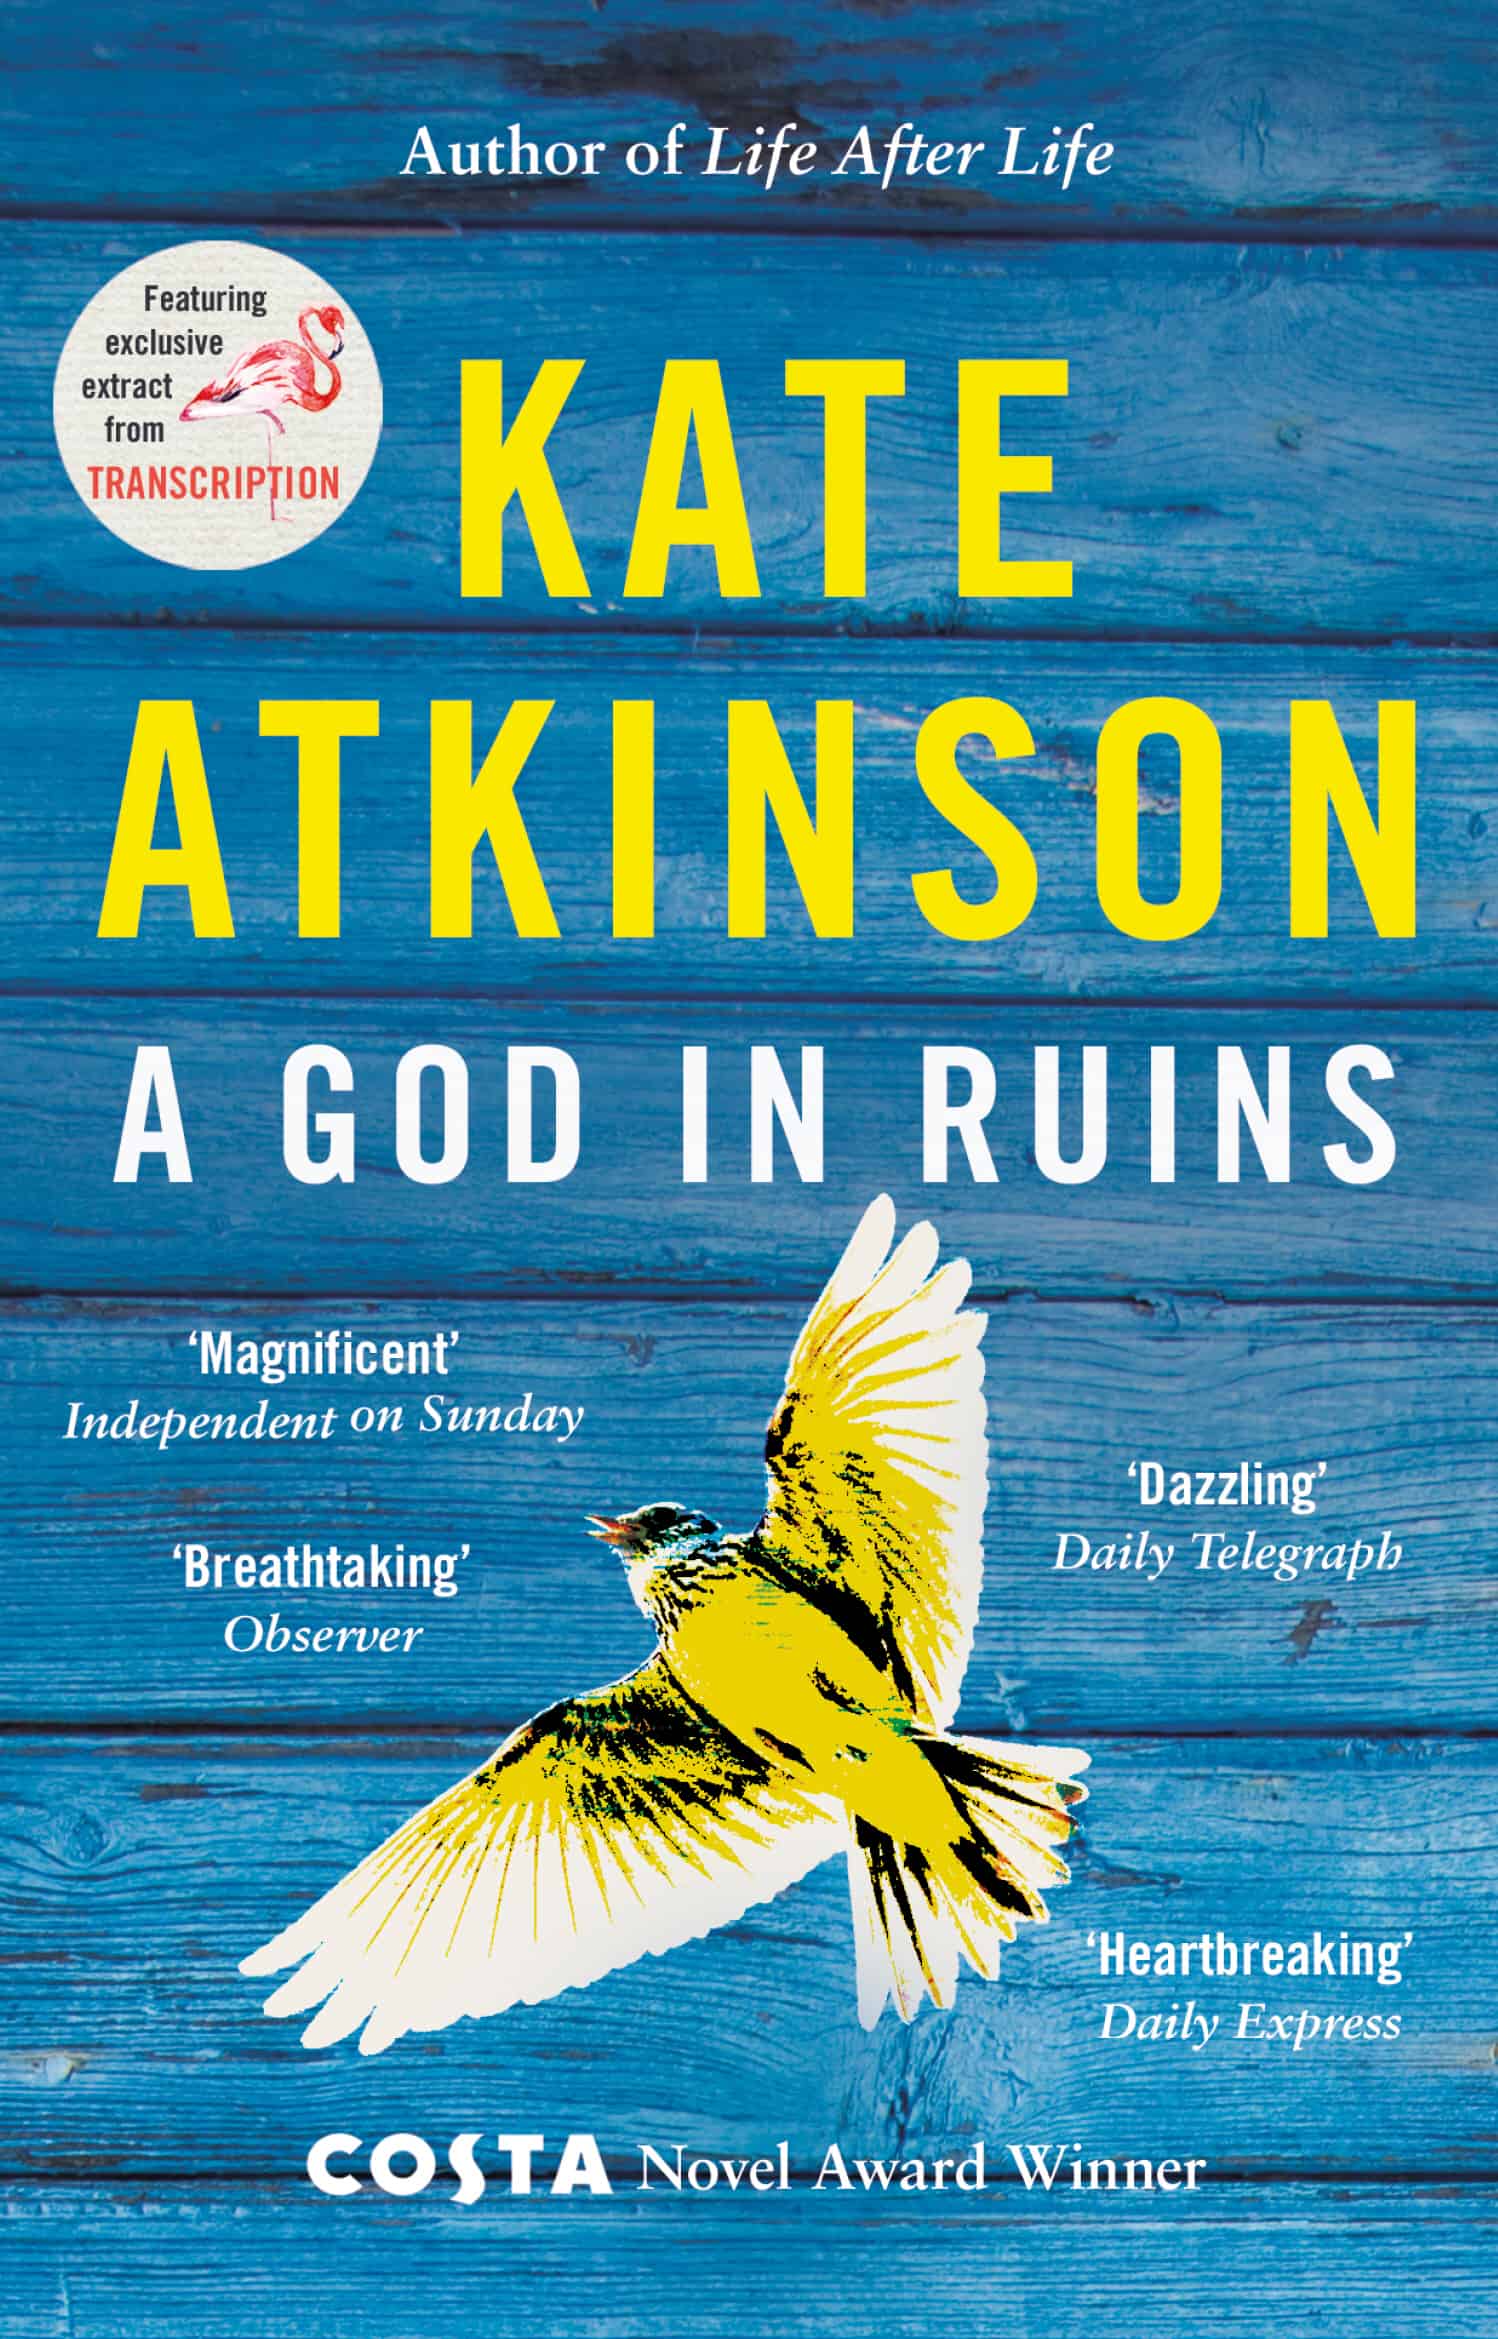 An image of the front cover of A God in Ruins by Kate Atkinson